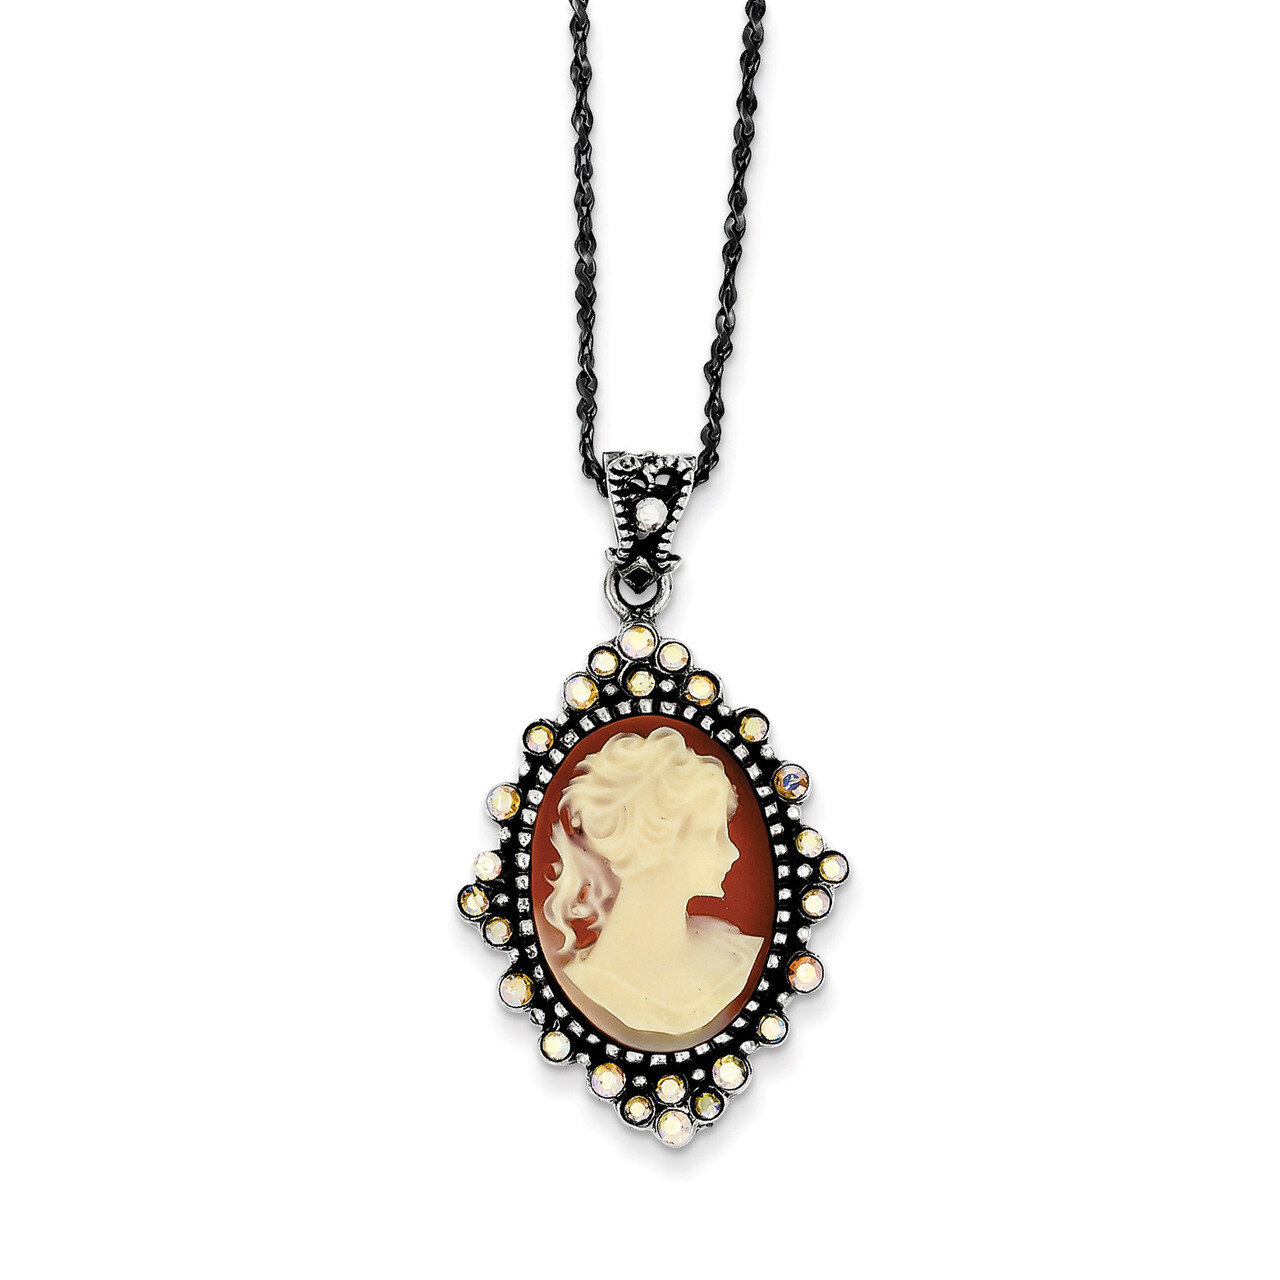 16 Inch Resin Cameo Crystal Pendant on Chain Sterling Silver QH789-16